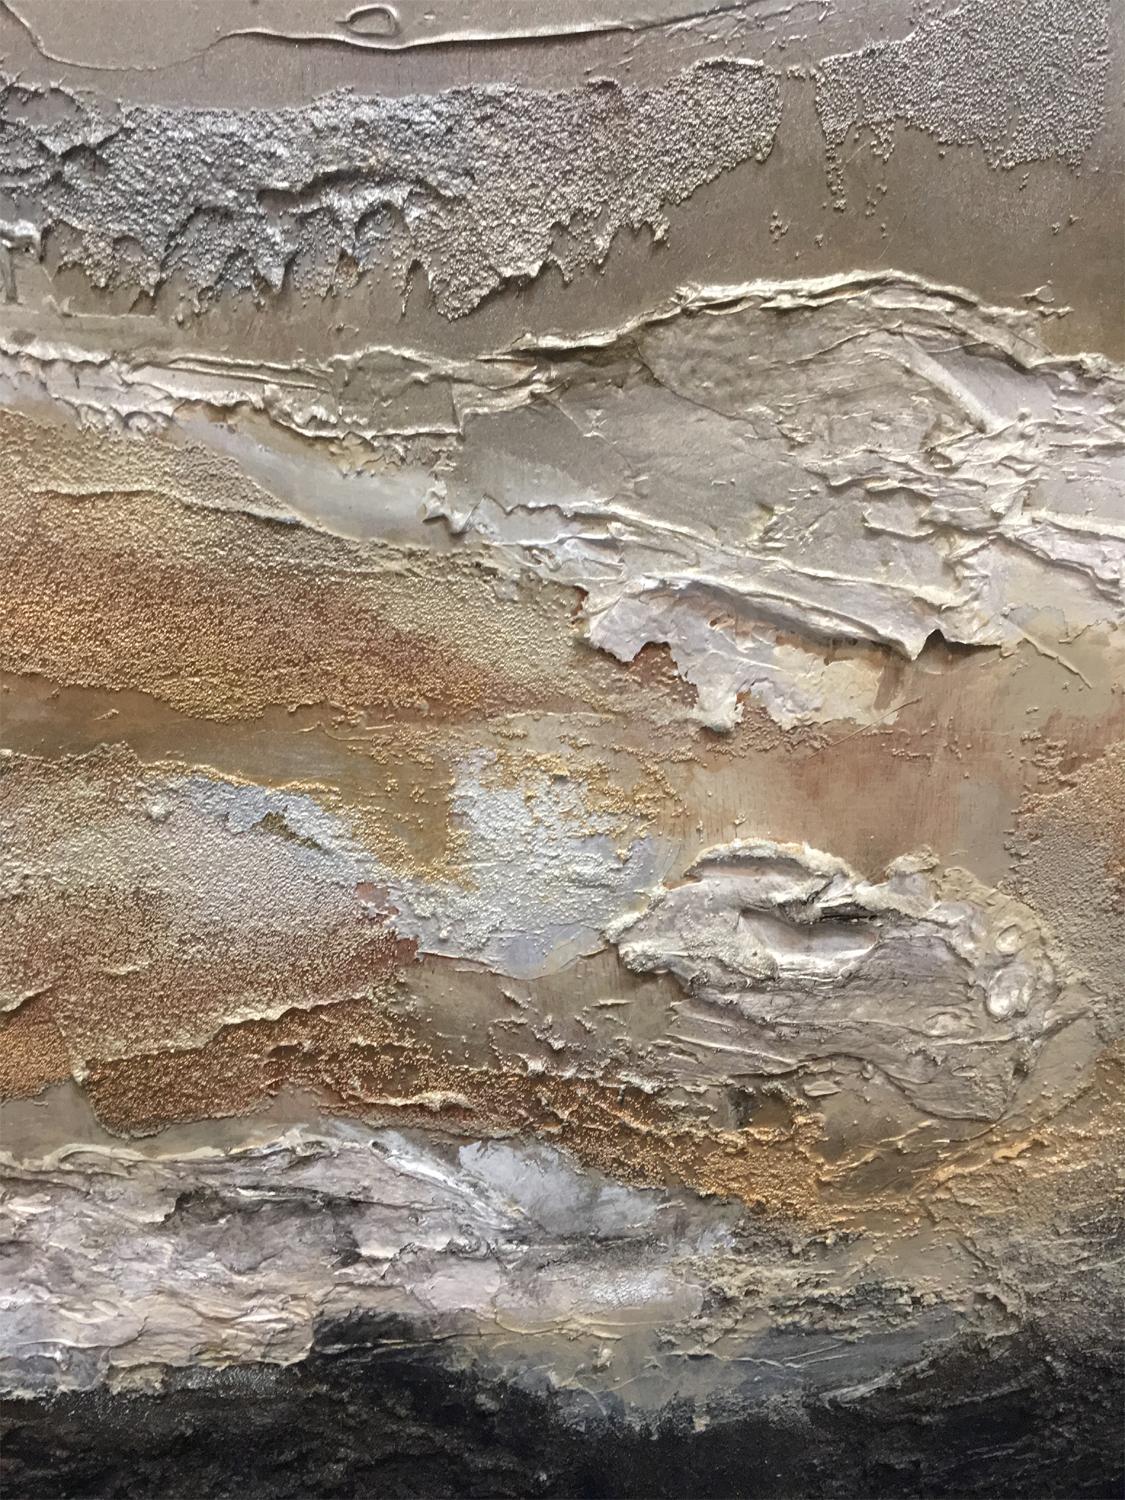 <p>Artist Comments<br />Inspired by love of nature and a beach I had dreamed about on my birthday. This richly layered heavy-textured painting can be read as land, seascape, or whatever the viewer sees. Eco-friendly oil over organic marble Italian